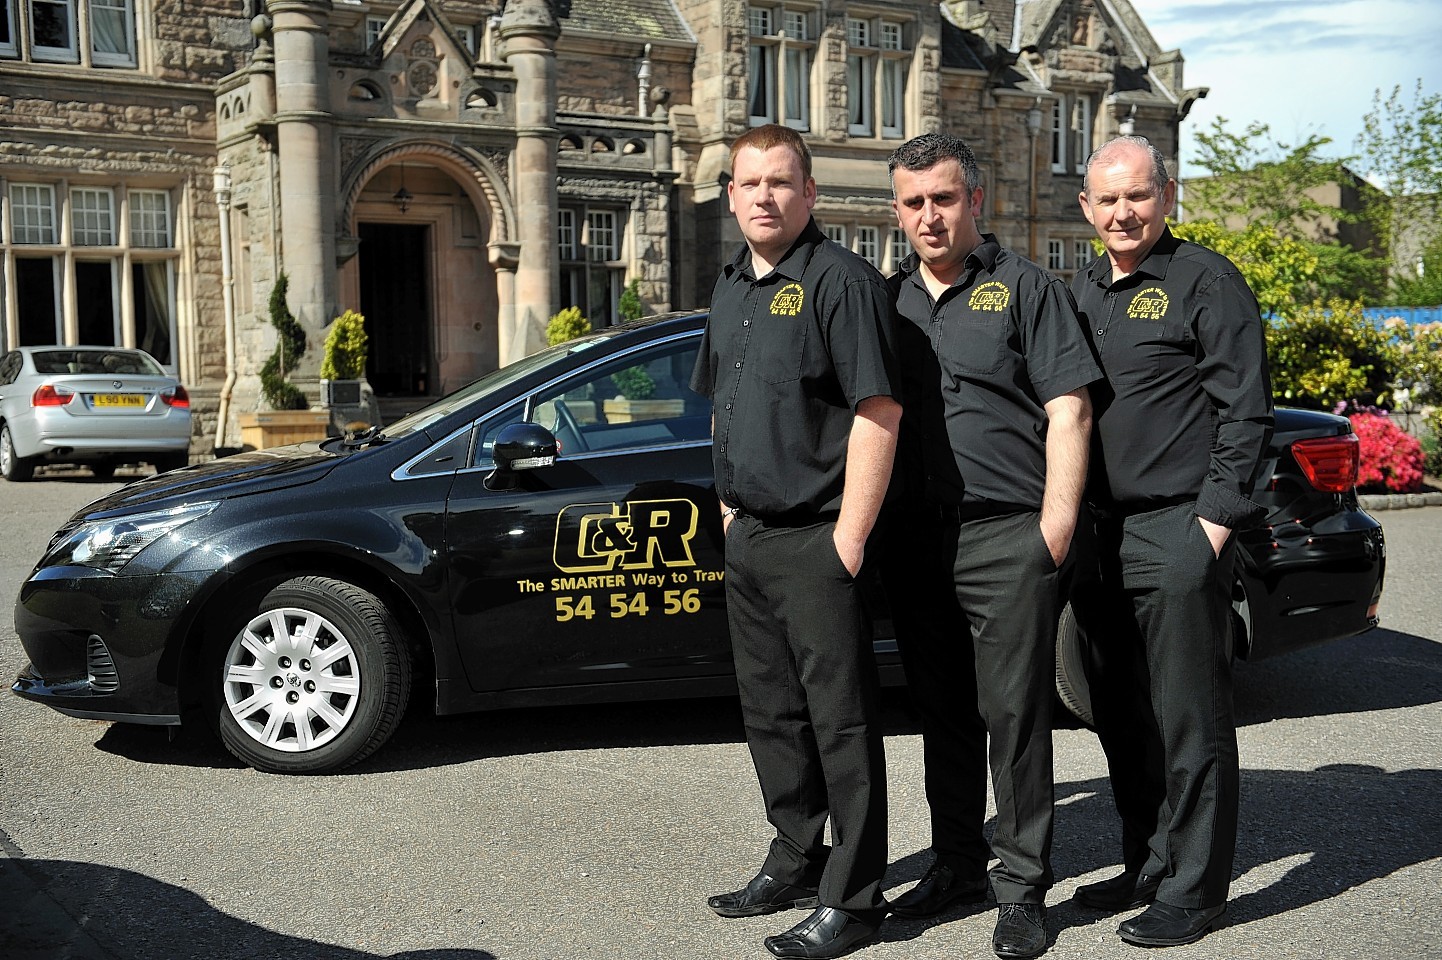 C&R Taxi drivers of Elgin, in their uniforms.